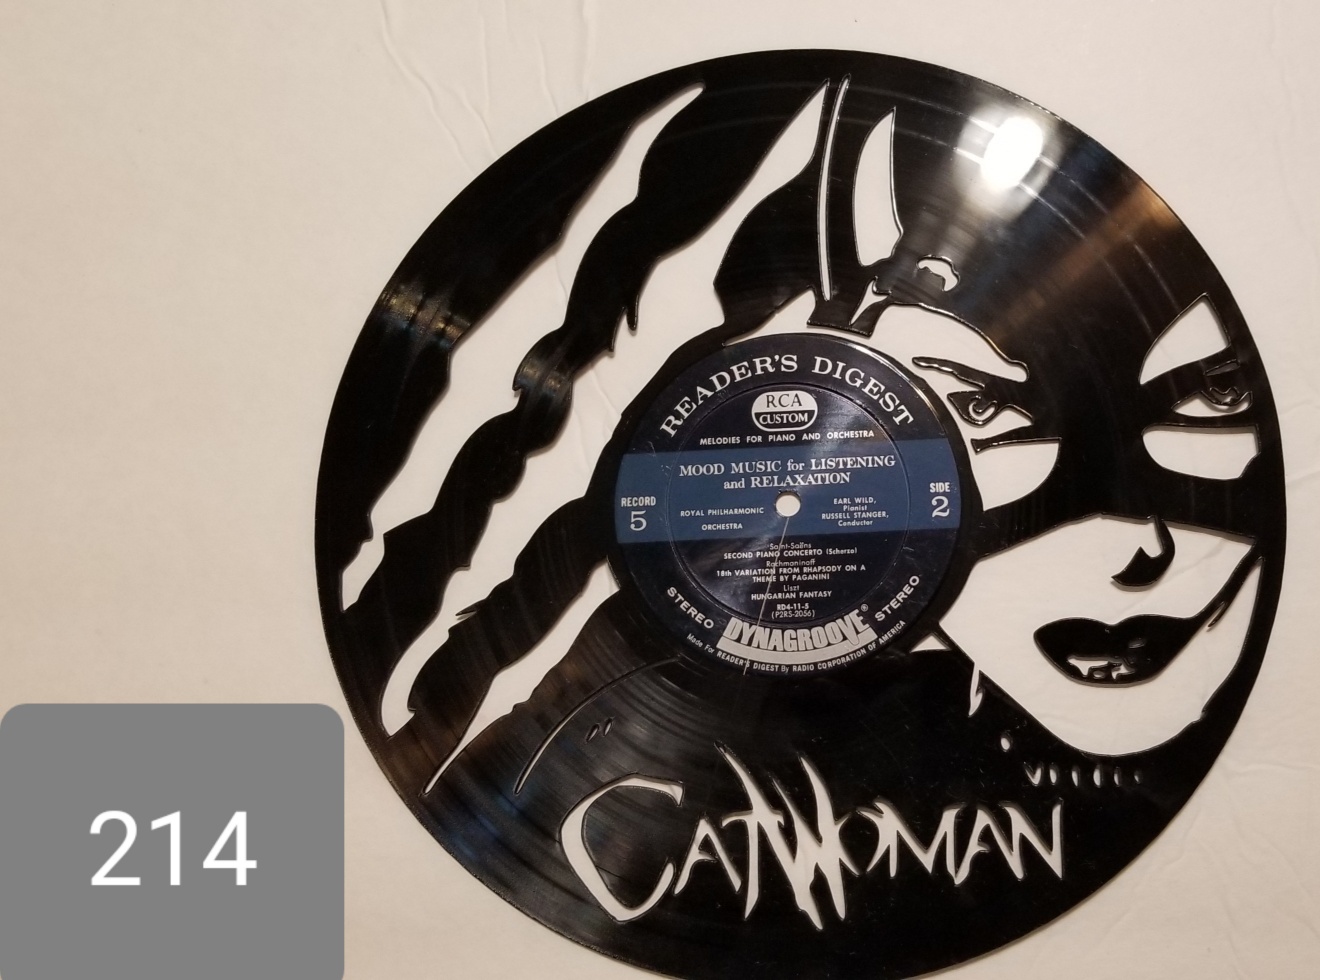 0214 R - CatWoman